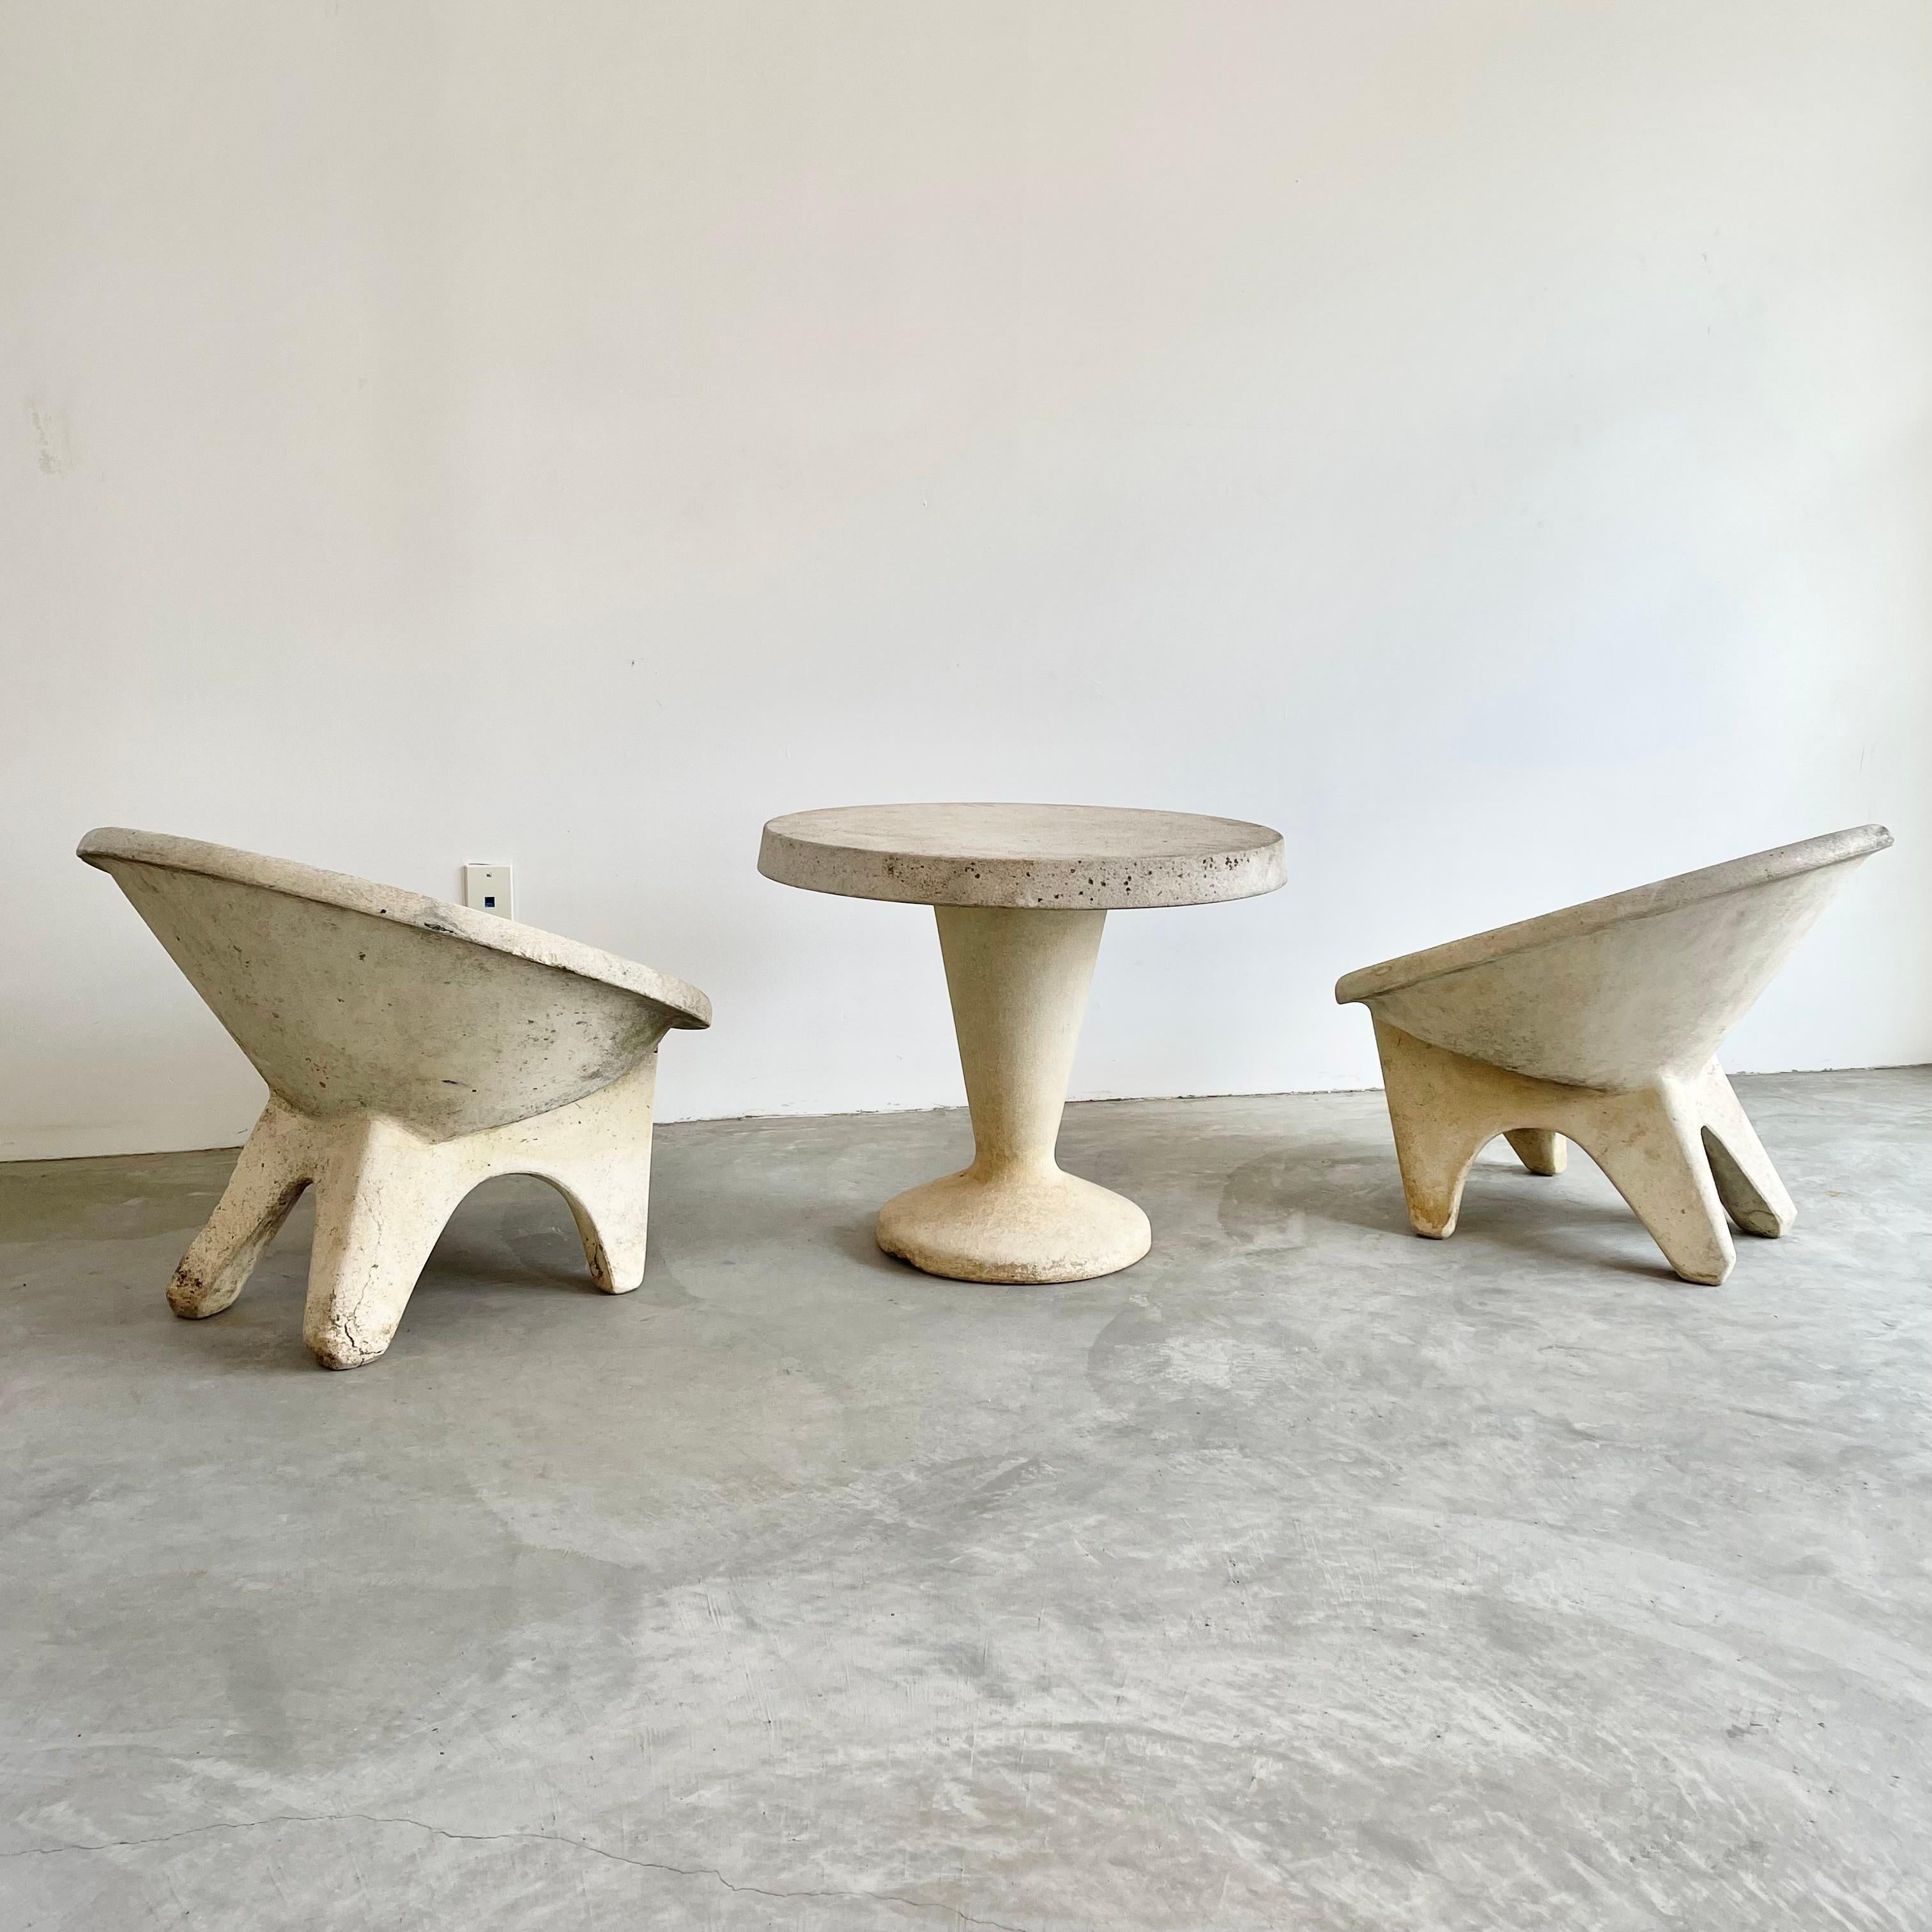 Sculptural Concrete Chairs and Table, 1960s Switzerland 1